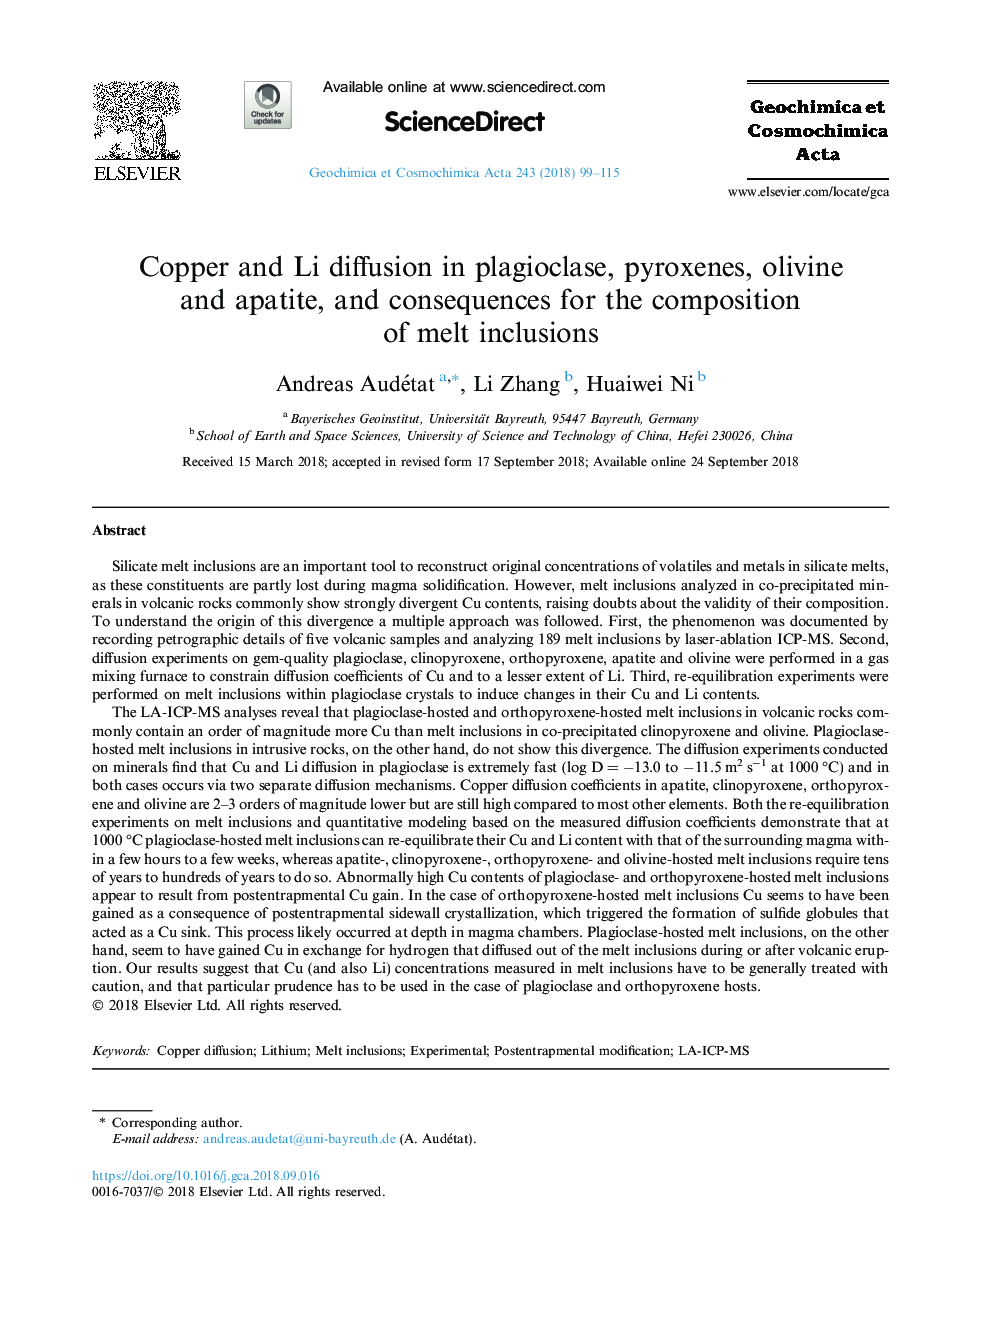 Copper and Li diffusion in plagioclase, pyroxenes, olivine and apatite, and consequences for the composition of melt inclusions